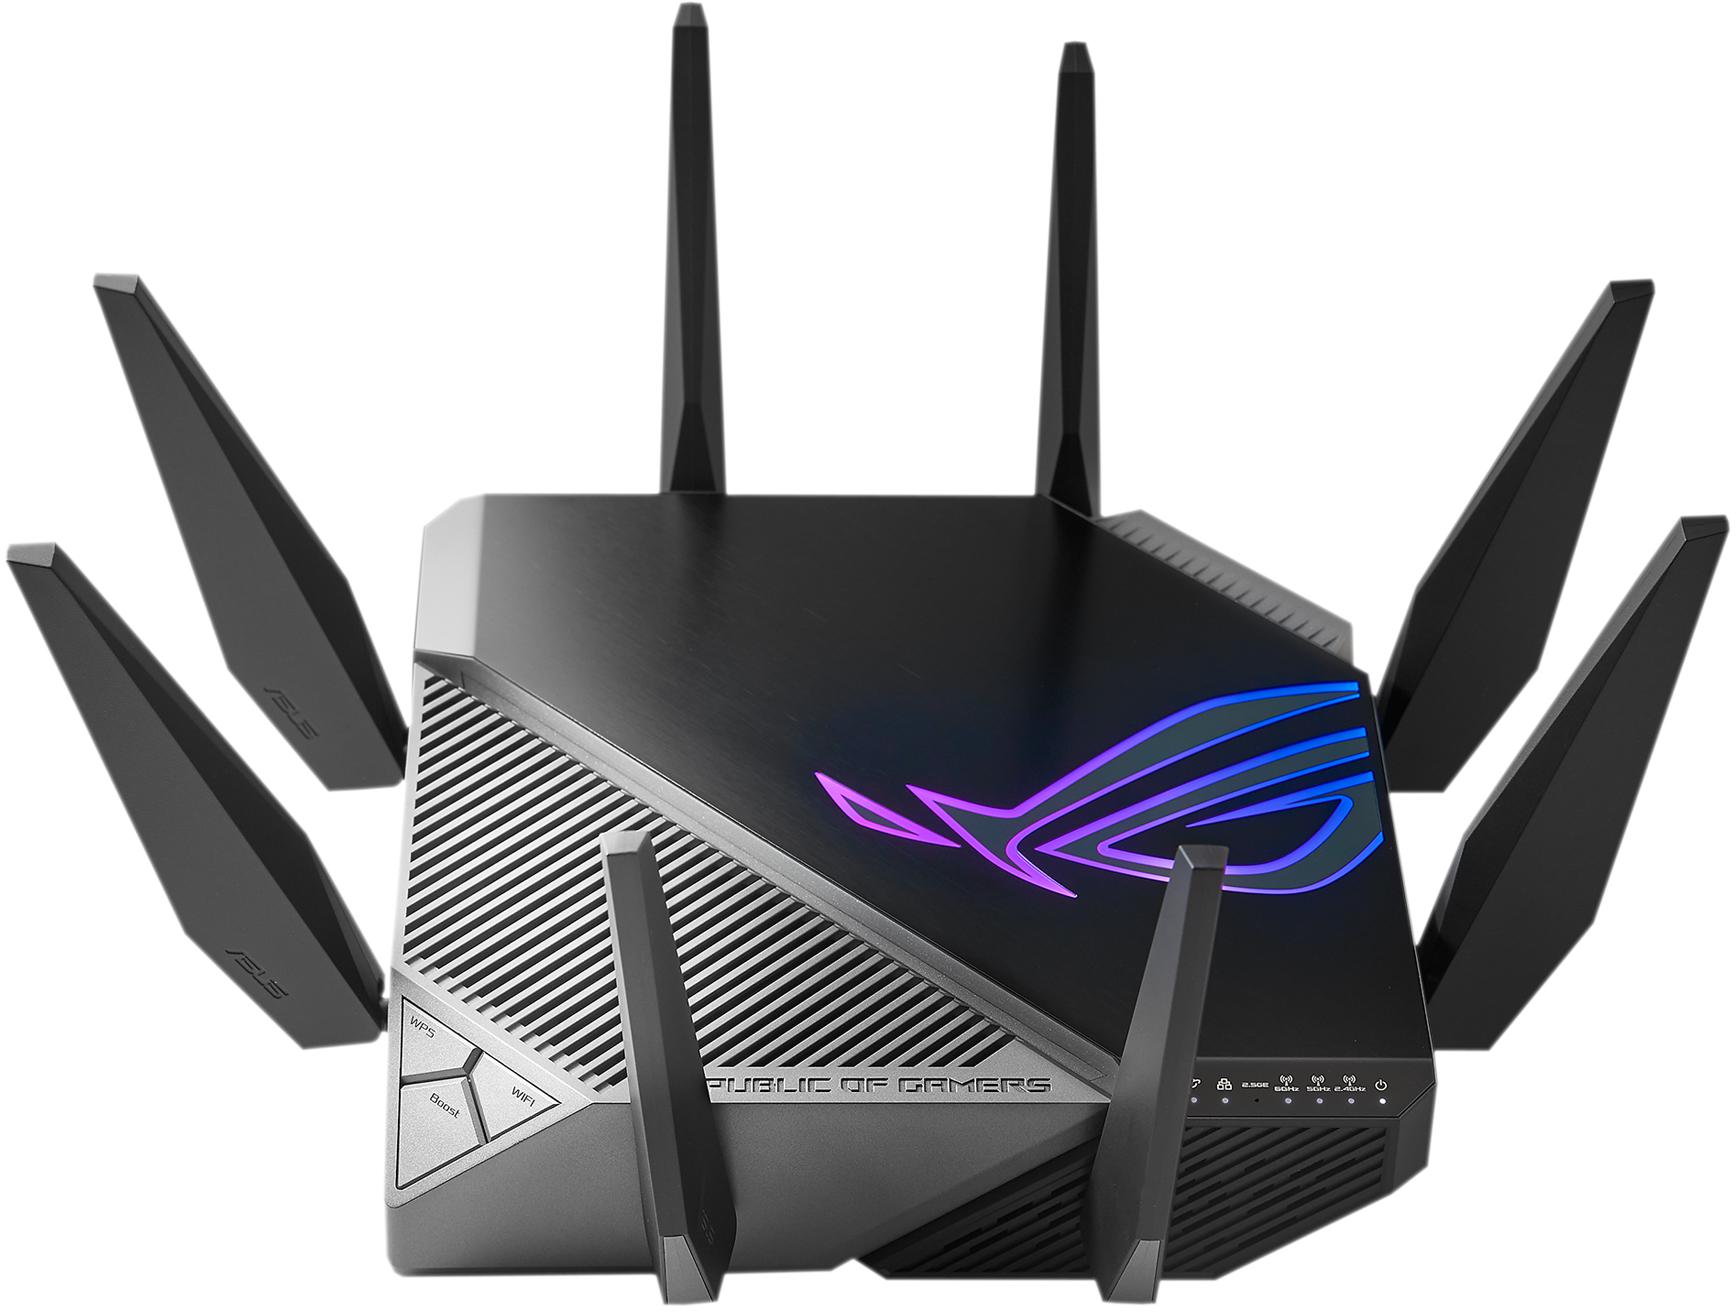 Asus - ** B Grade ** Router Gaming Asus Rapture GT-AXE11000 Tri-Band AiMesh Wireless WiFi6E